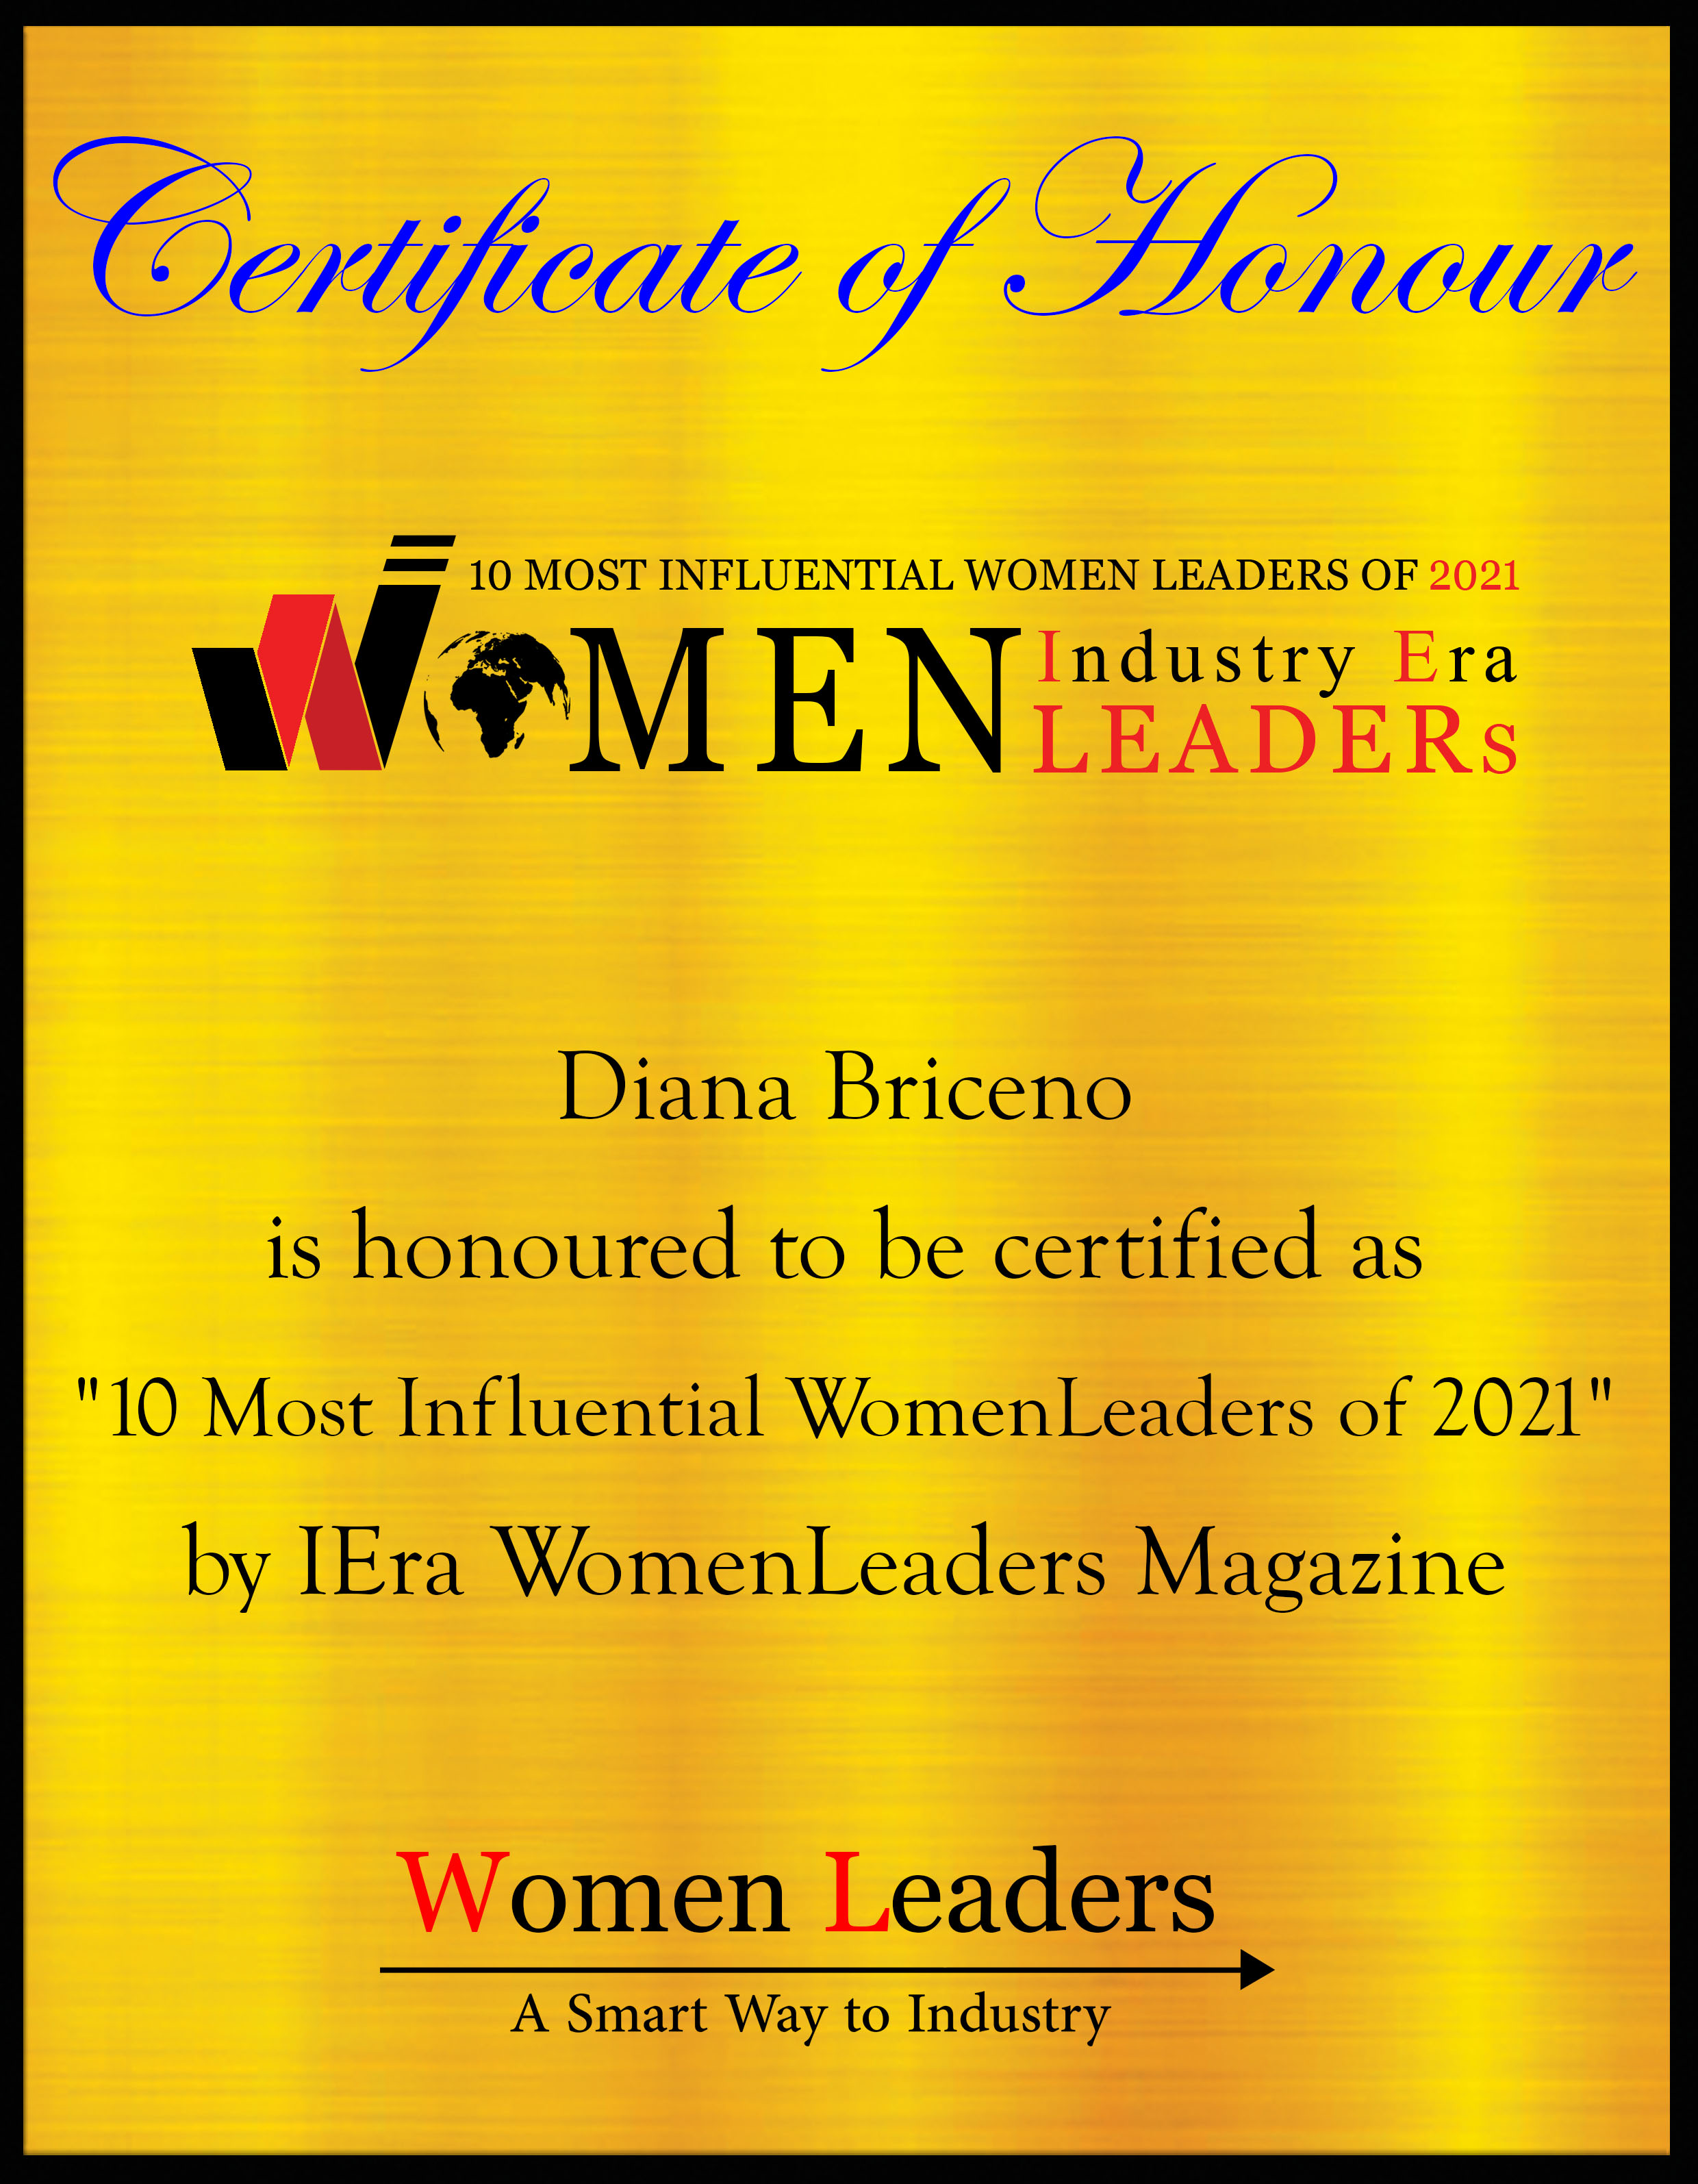 Diana Briceno, Senior Marketing Manager at Centurion Restaurant Group, Most Influential WomenLeaders of 2021